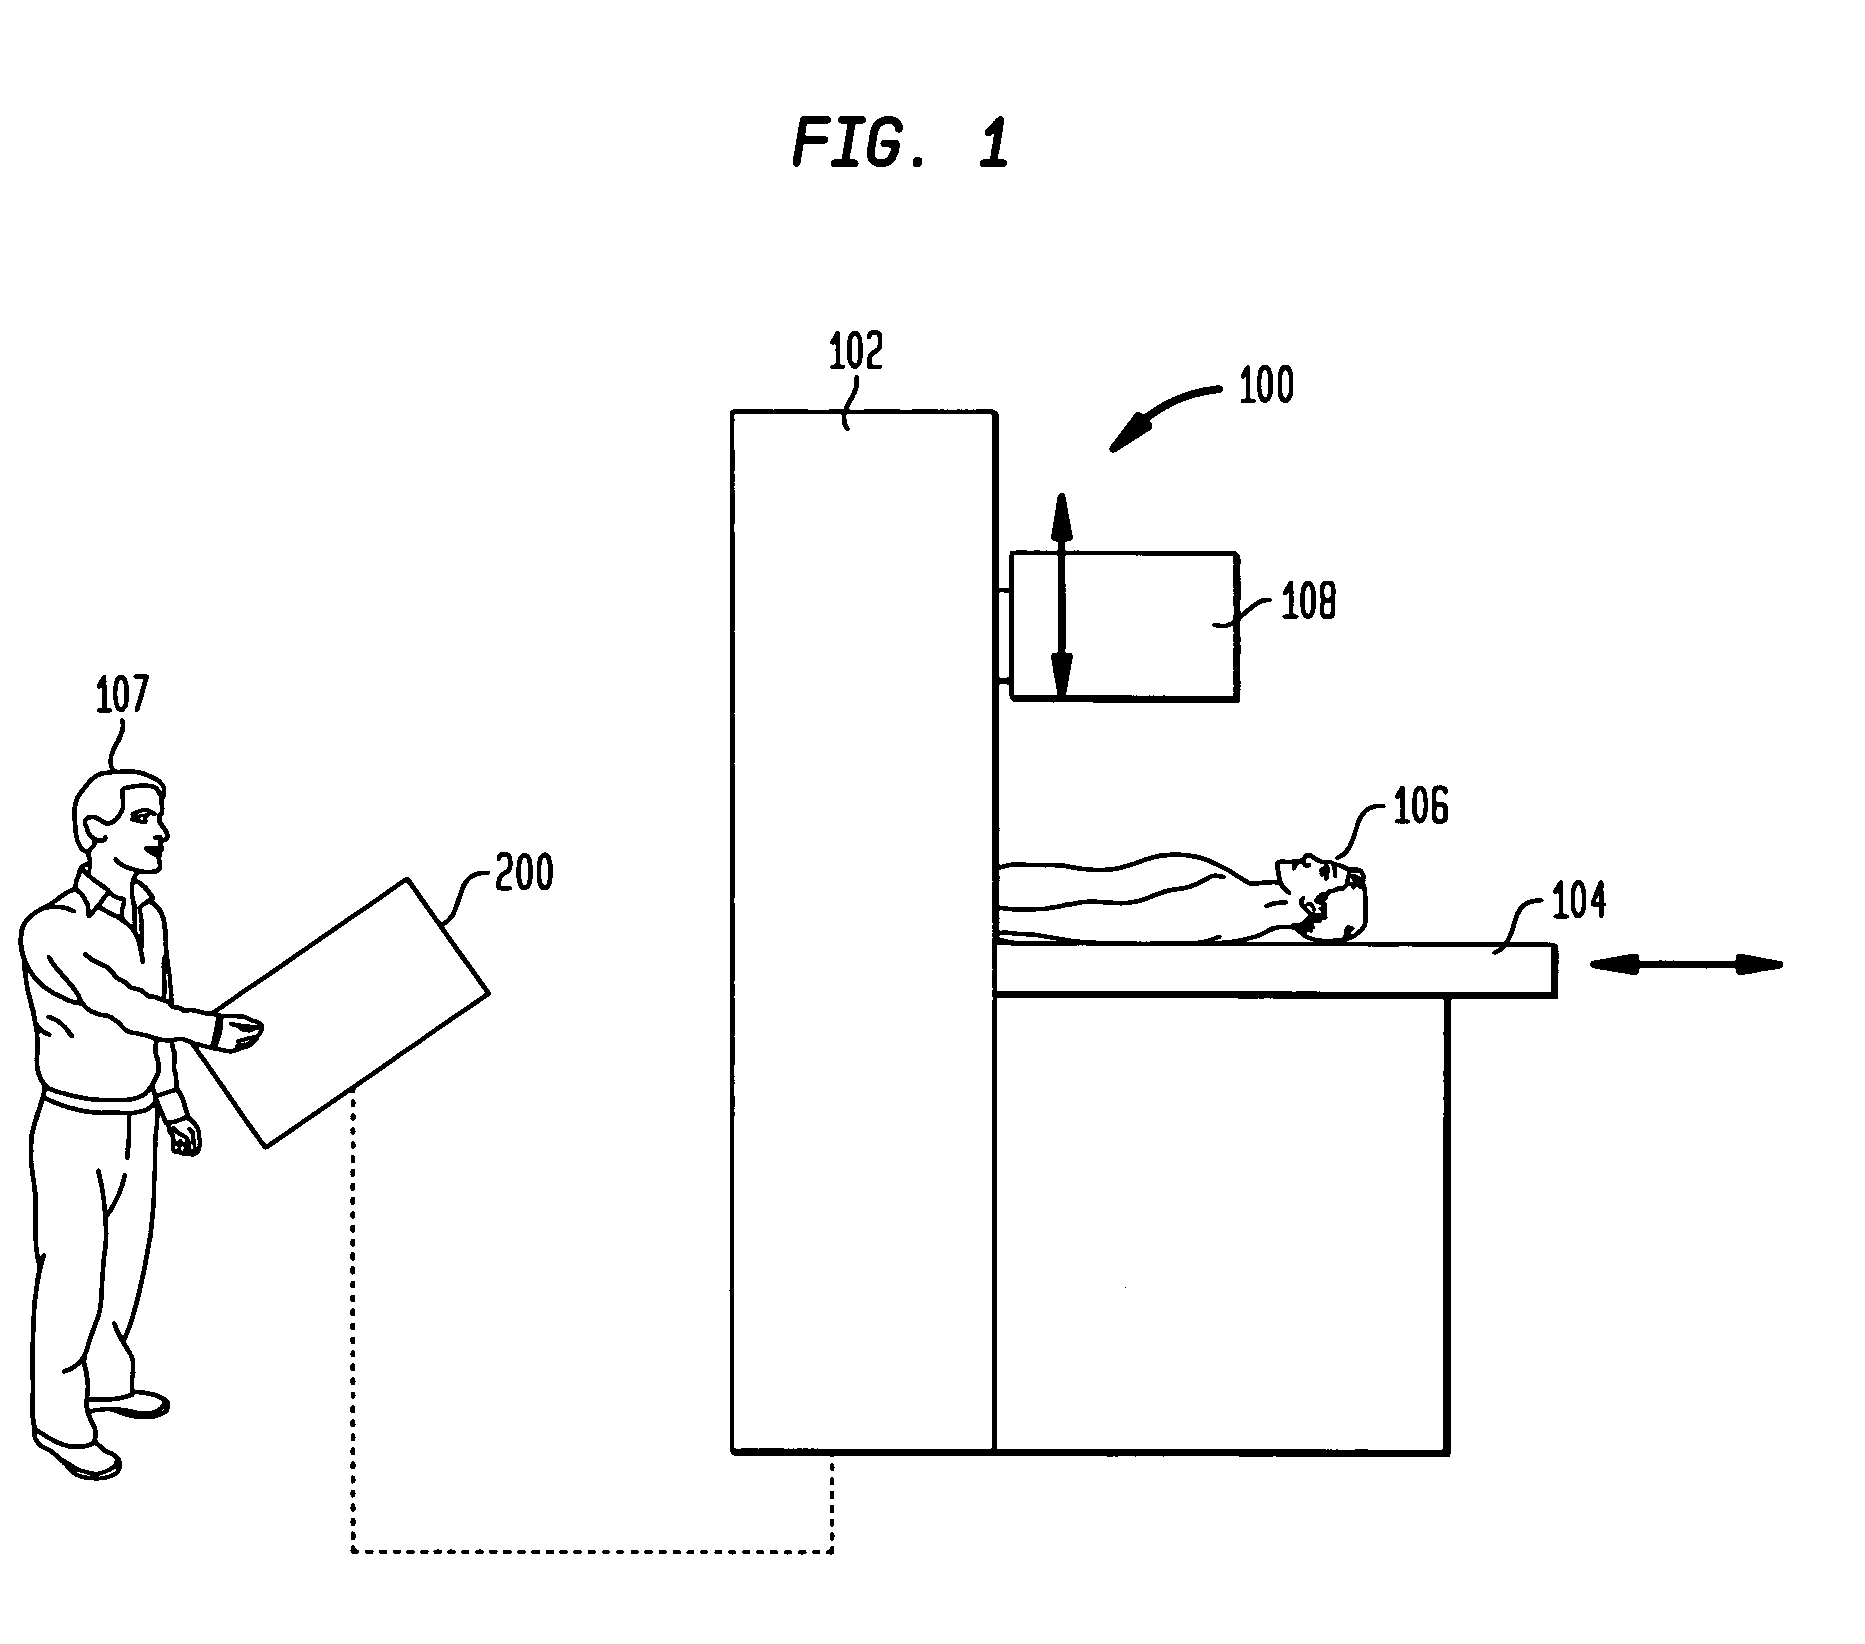 Systems and methods for creating stable camera optics